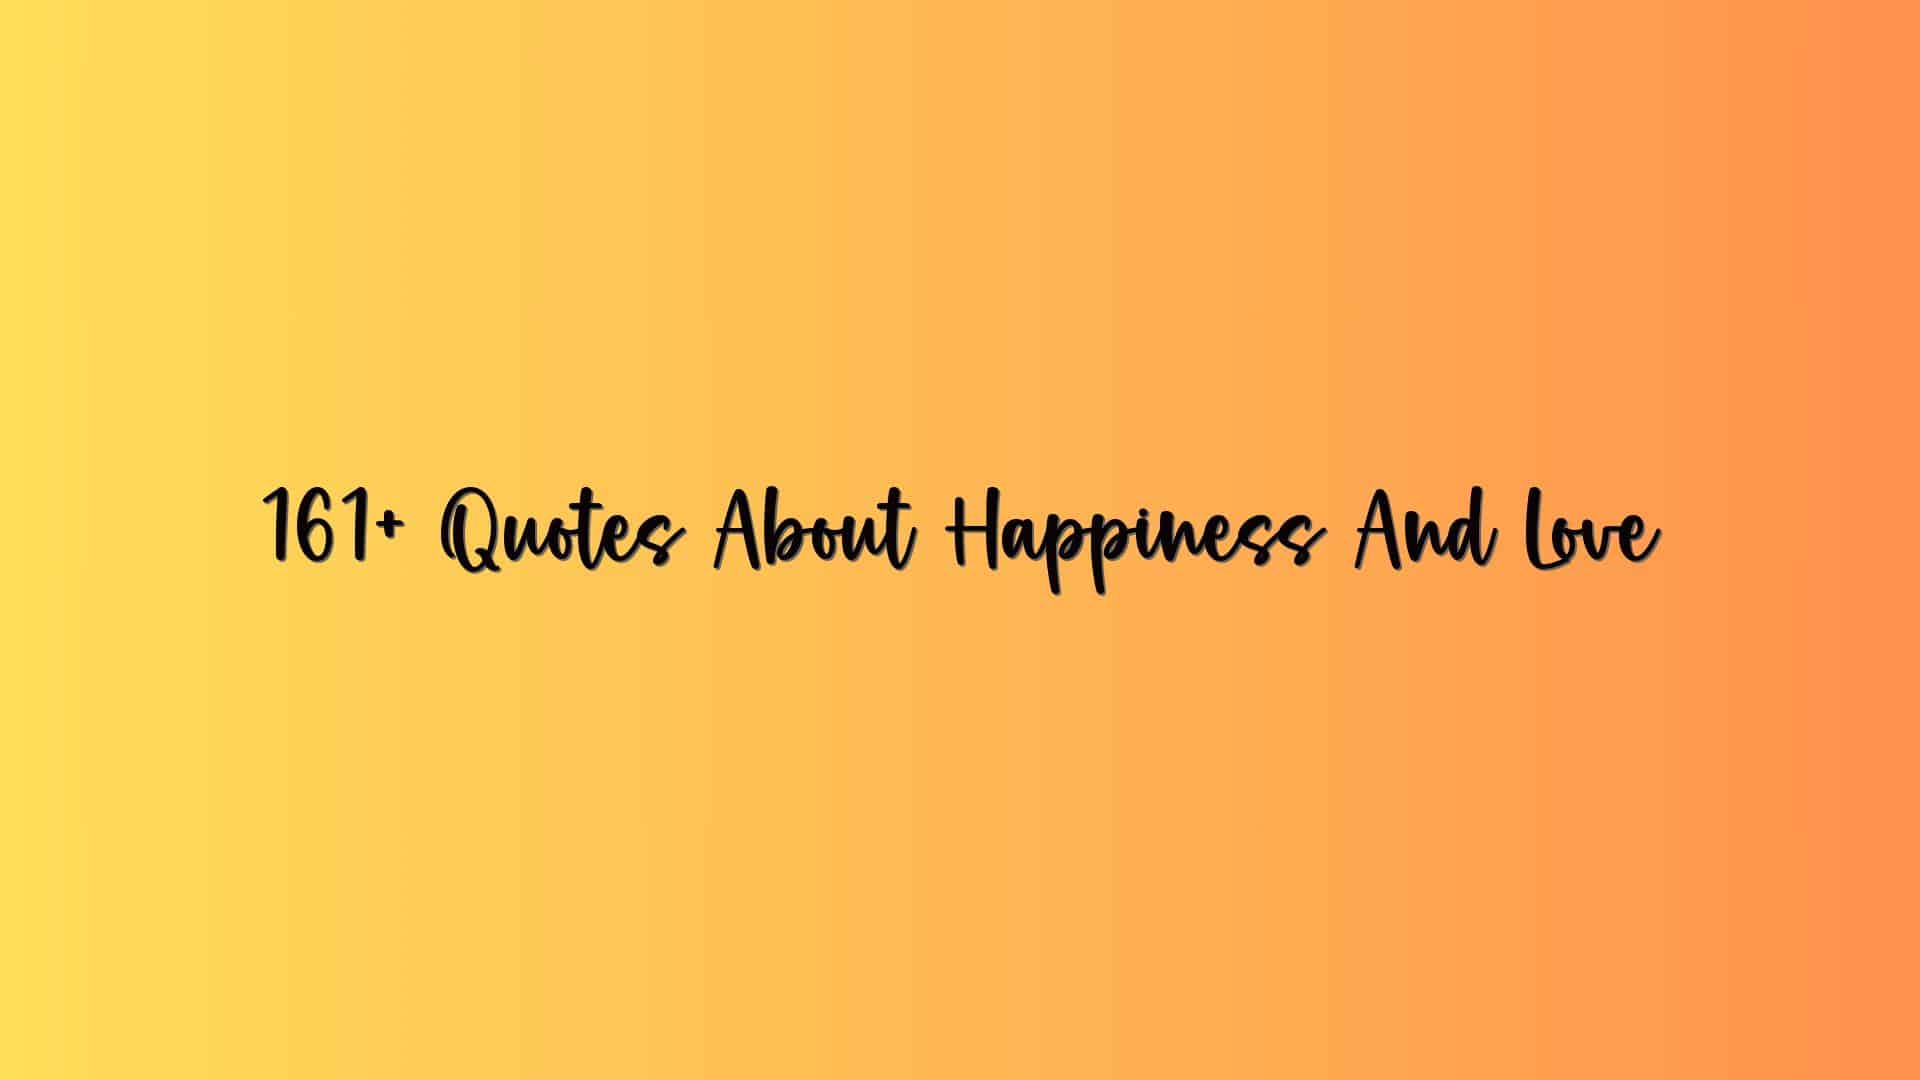 161+ Quotes About Happiness And Love